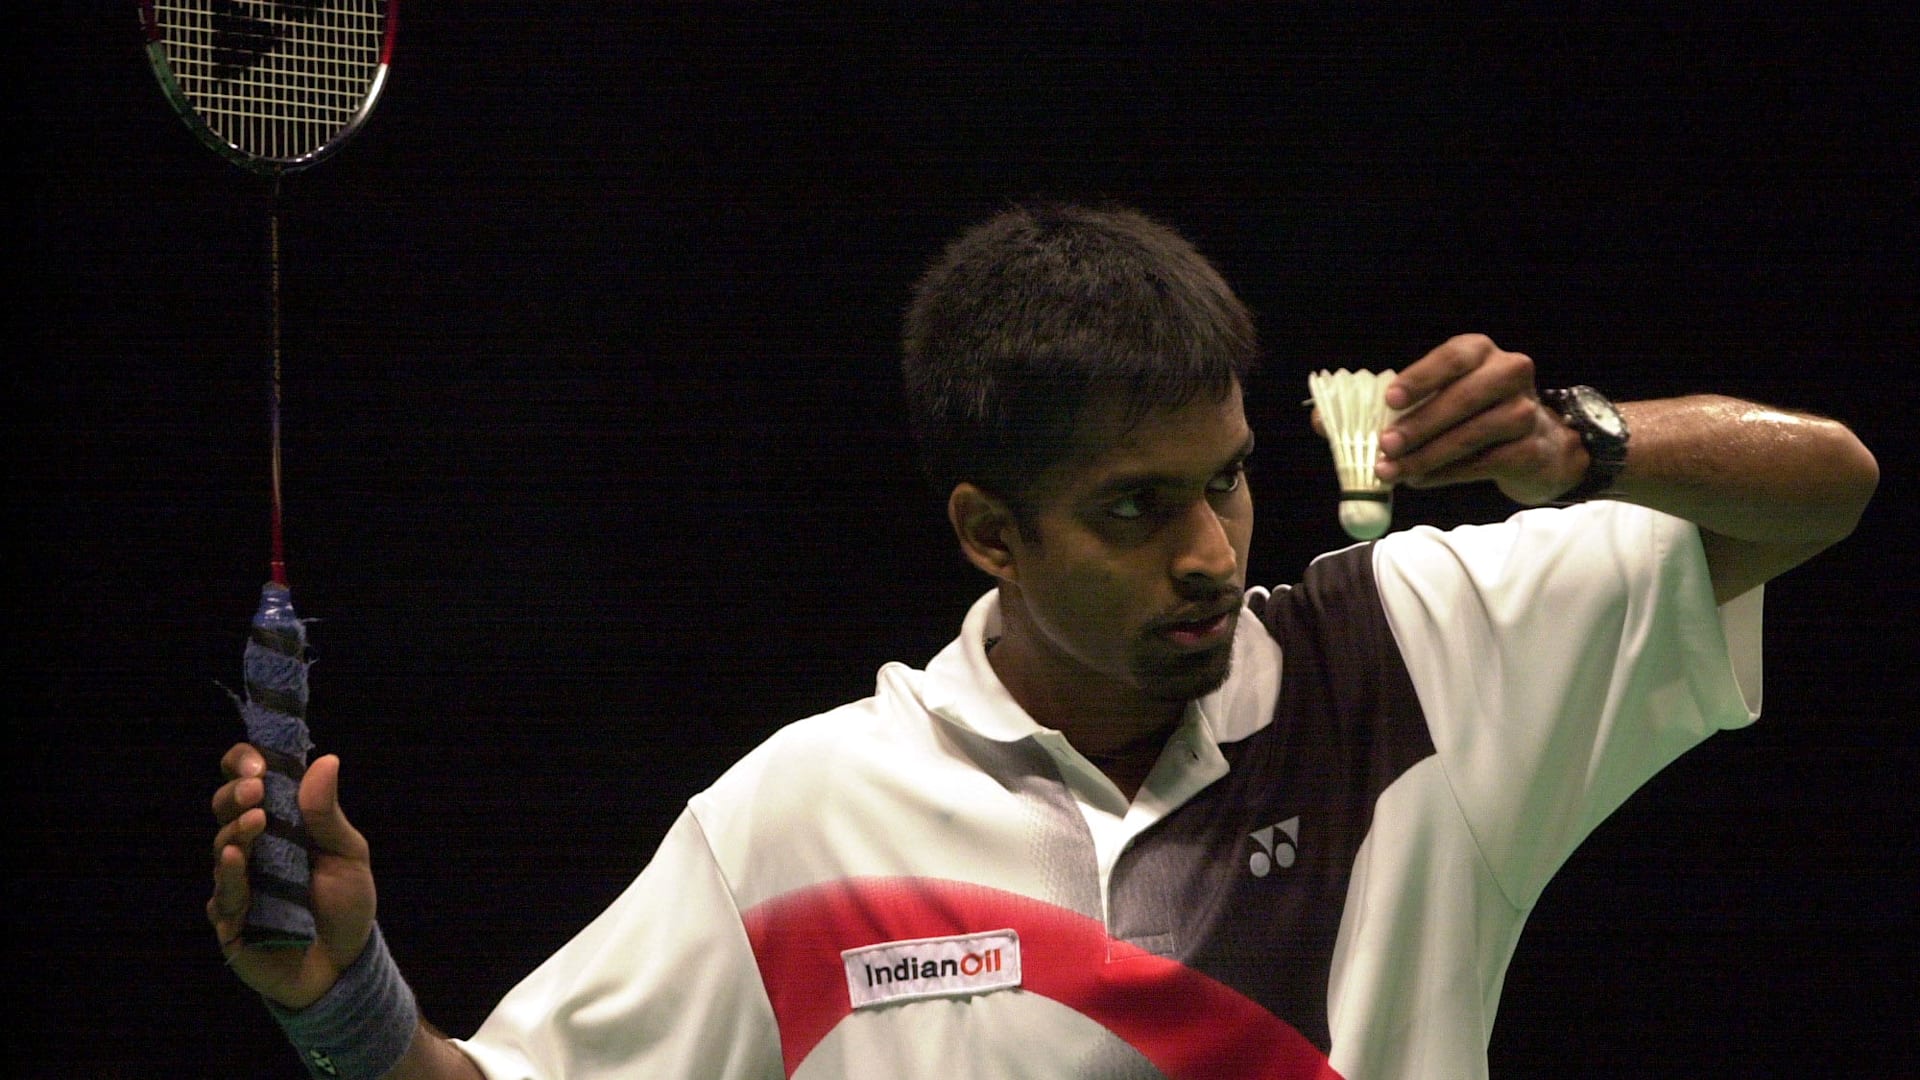 Indian sport can make a big leap at Tokyo Olympics, says Pullela Gopichand